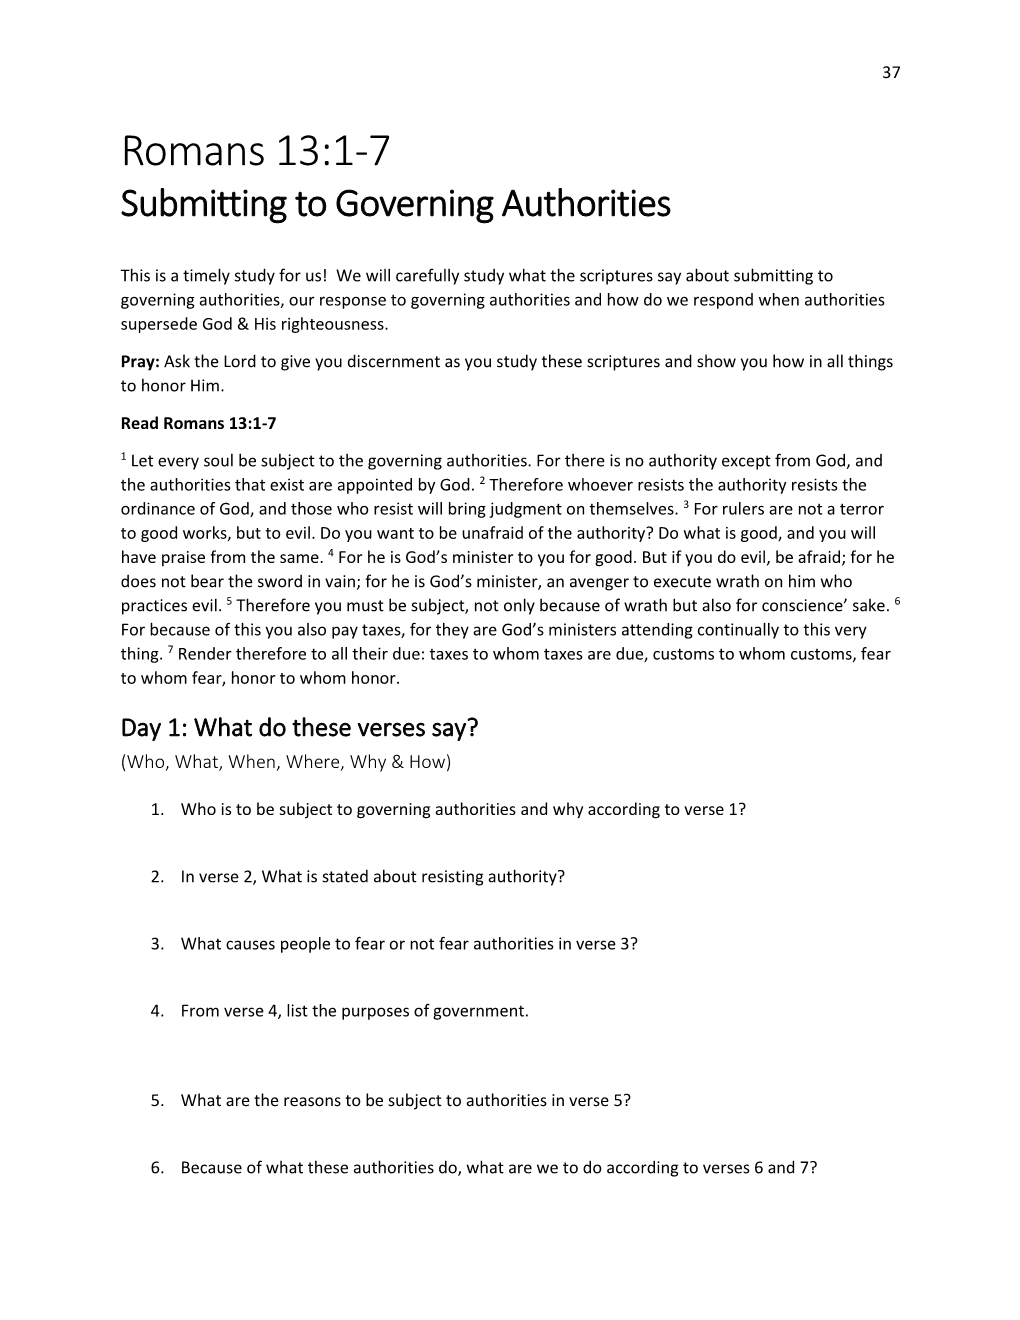 Romans 13:1-7 Submitting to Governing Authorities